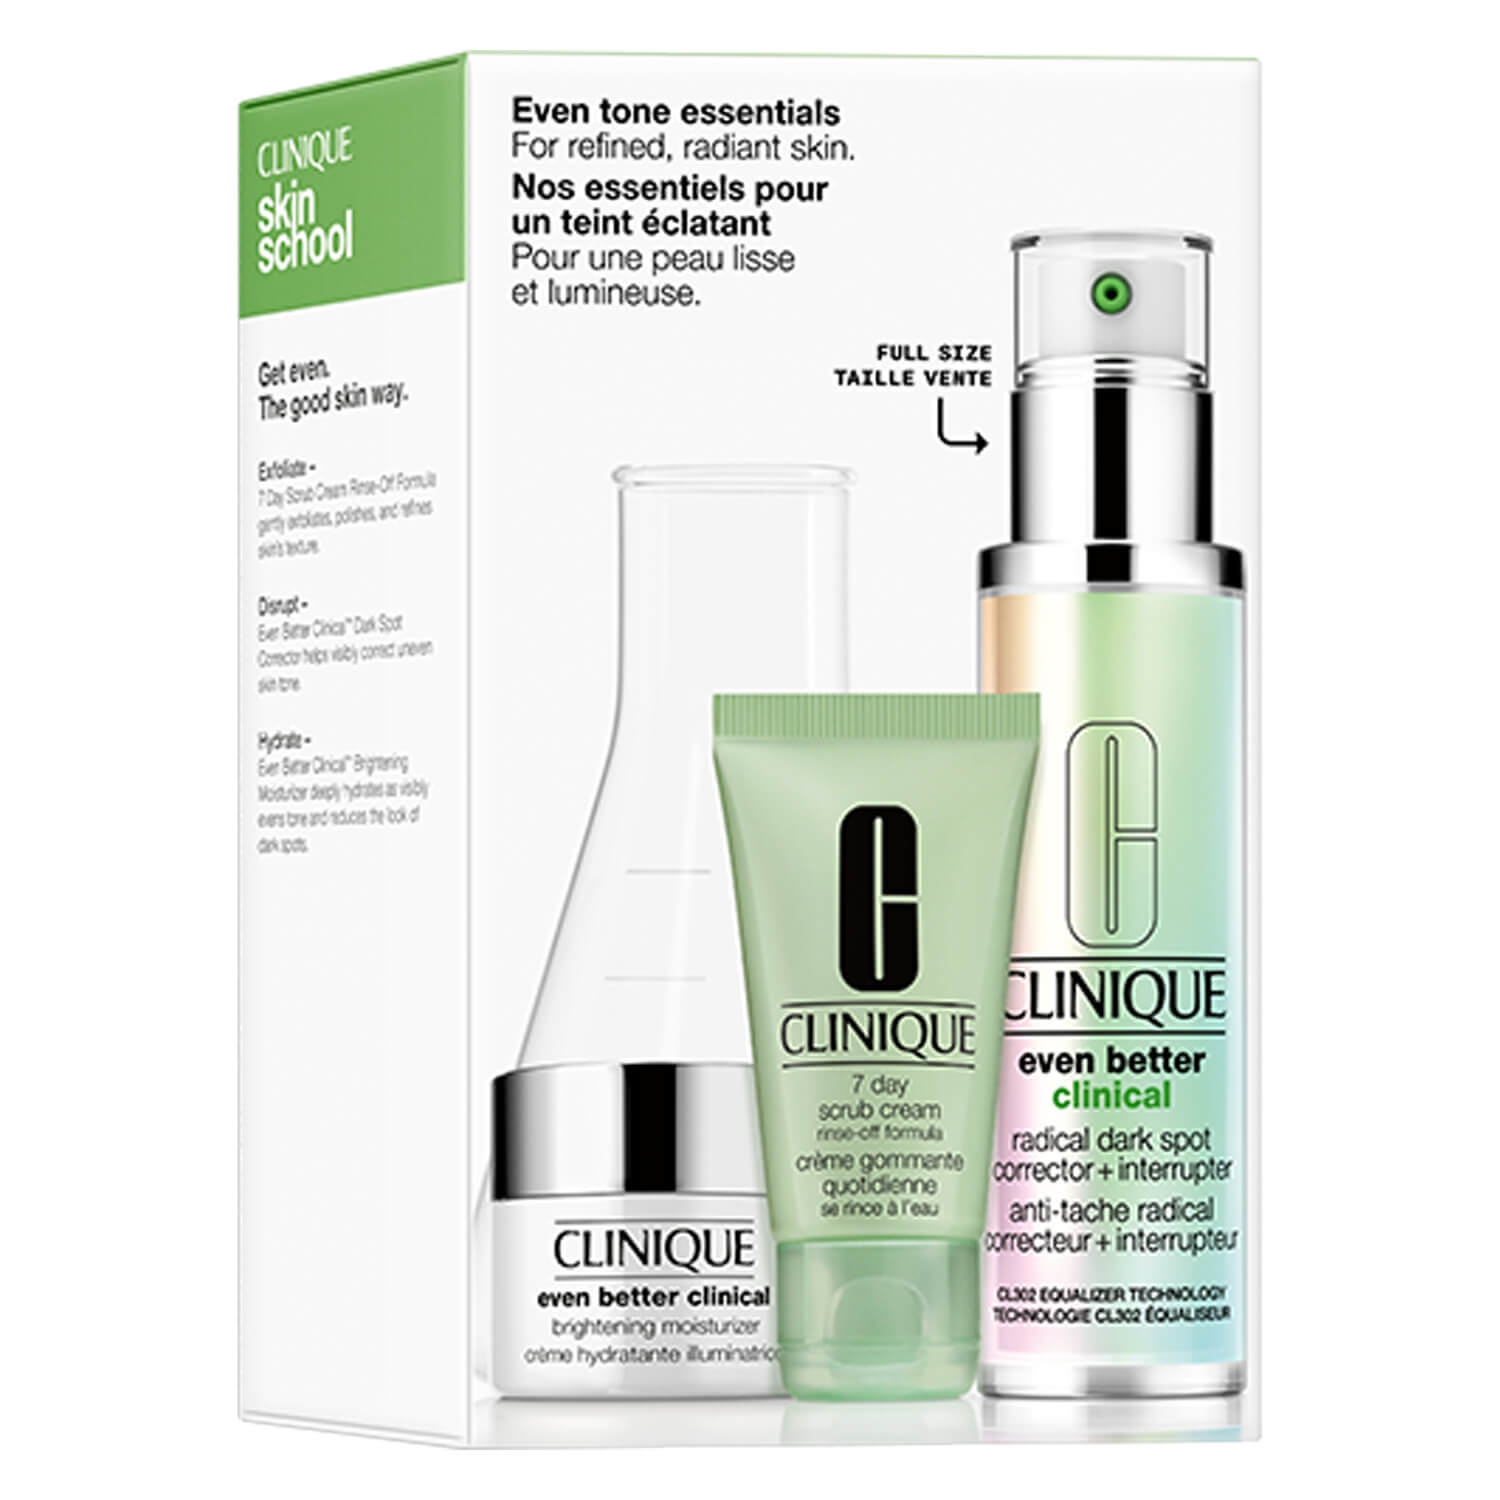 Product image from Clinique Set - Even Tone Essentials Kit